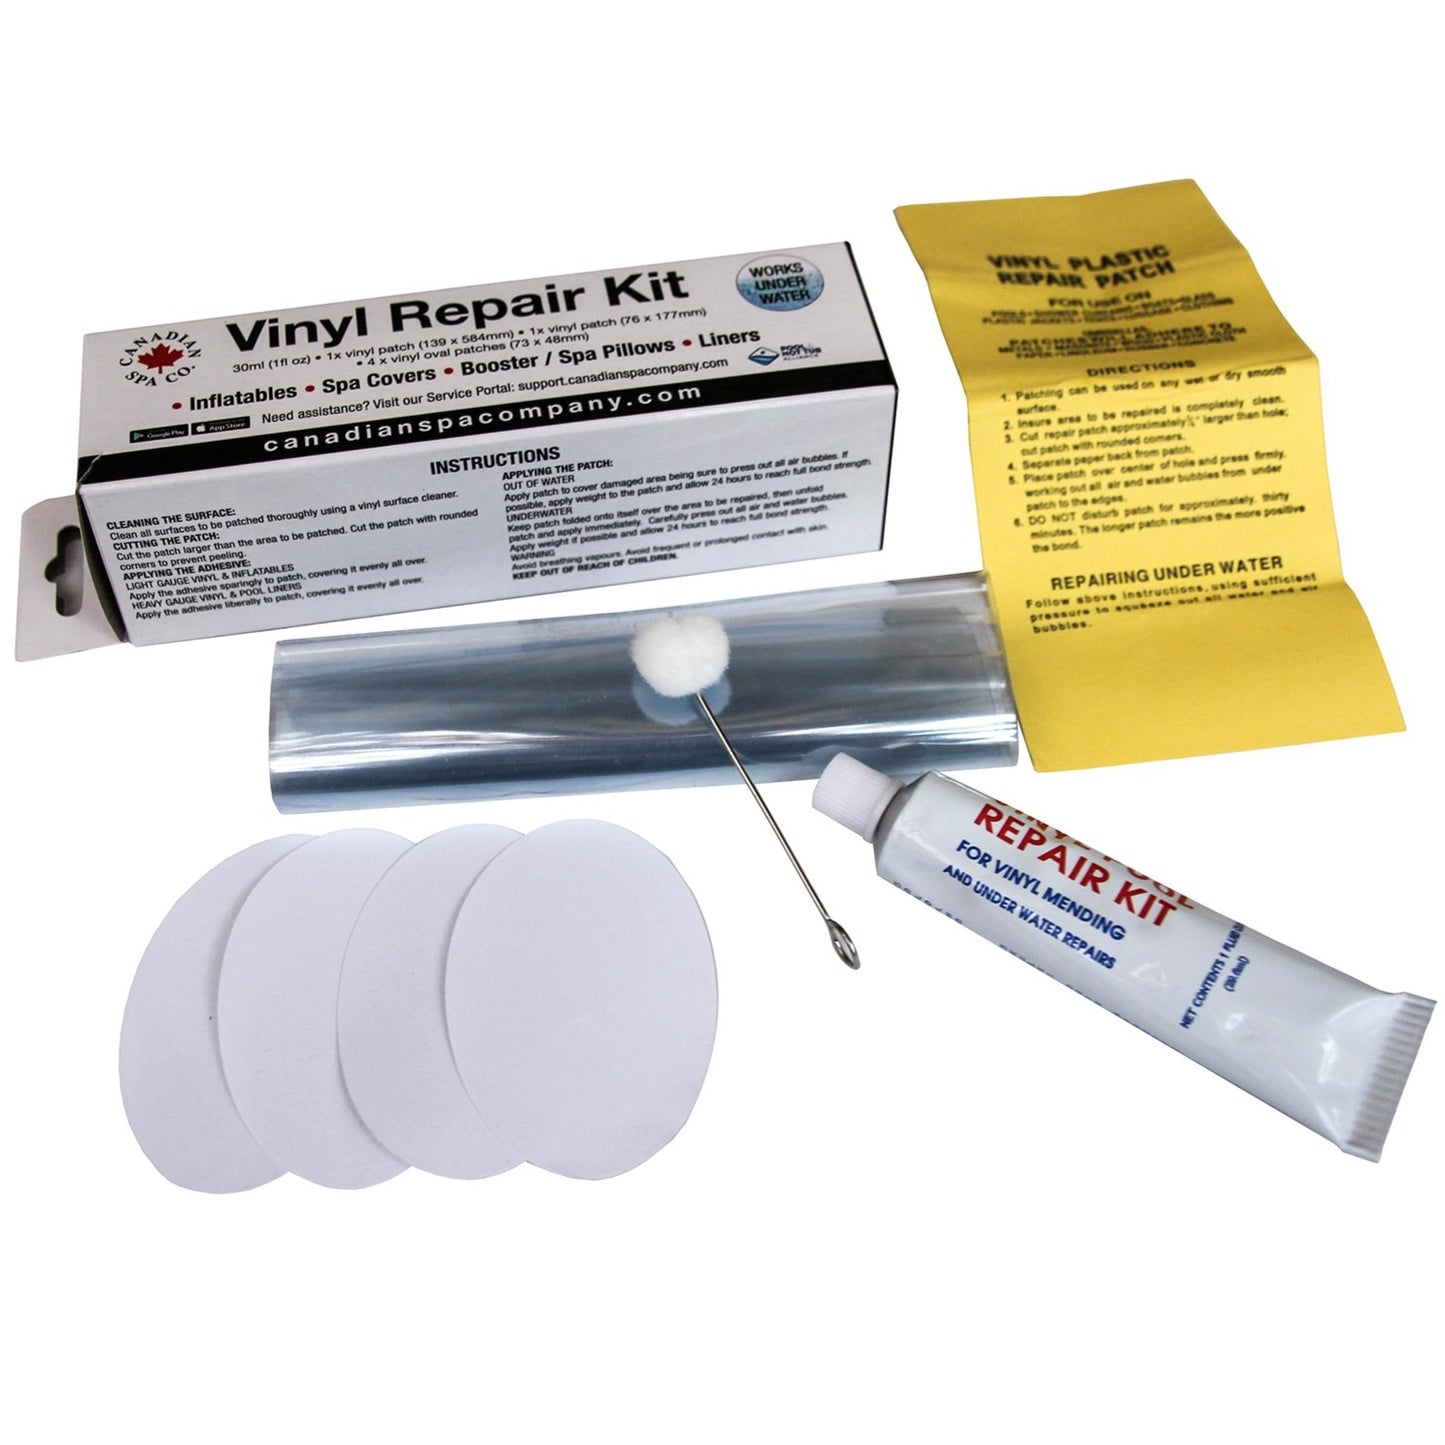 Vinyl Repair Kit with Patches